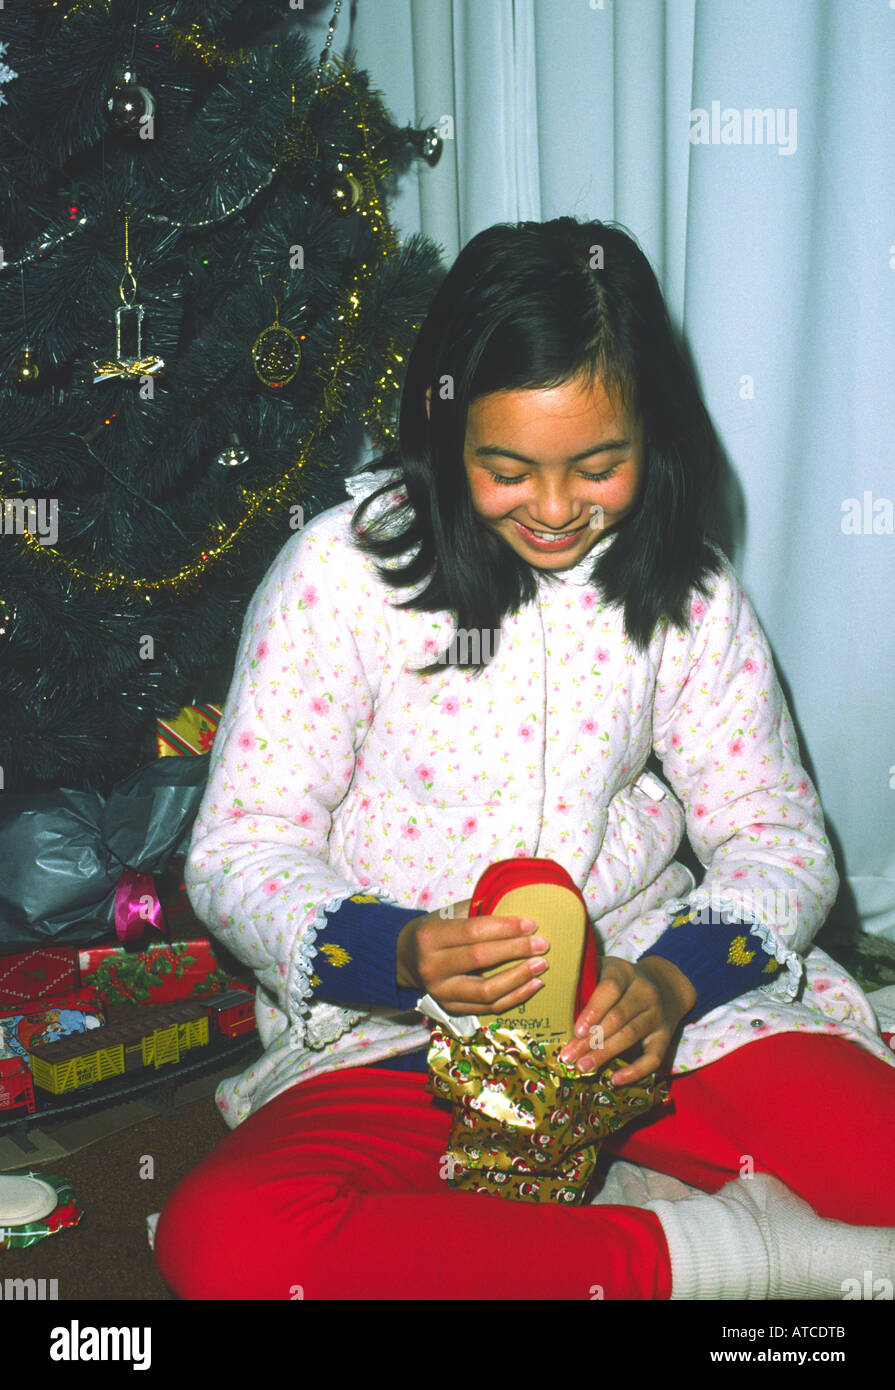 ten 10 year old girl opens presents Christmas morning next to artificial tree Stock Photo